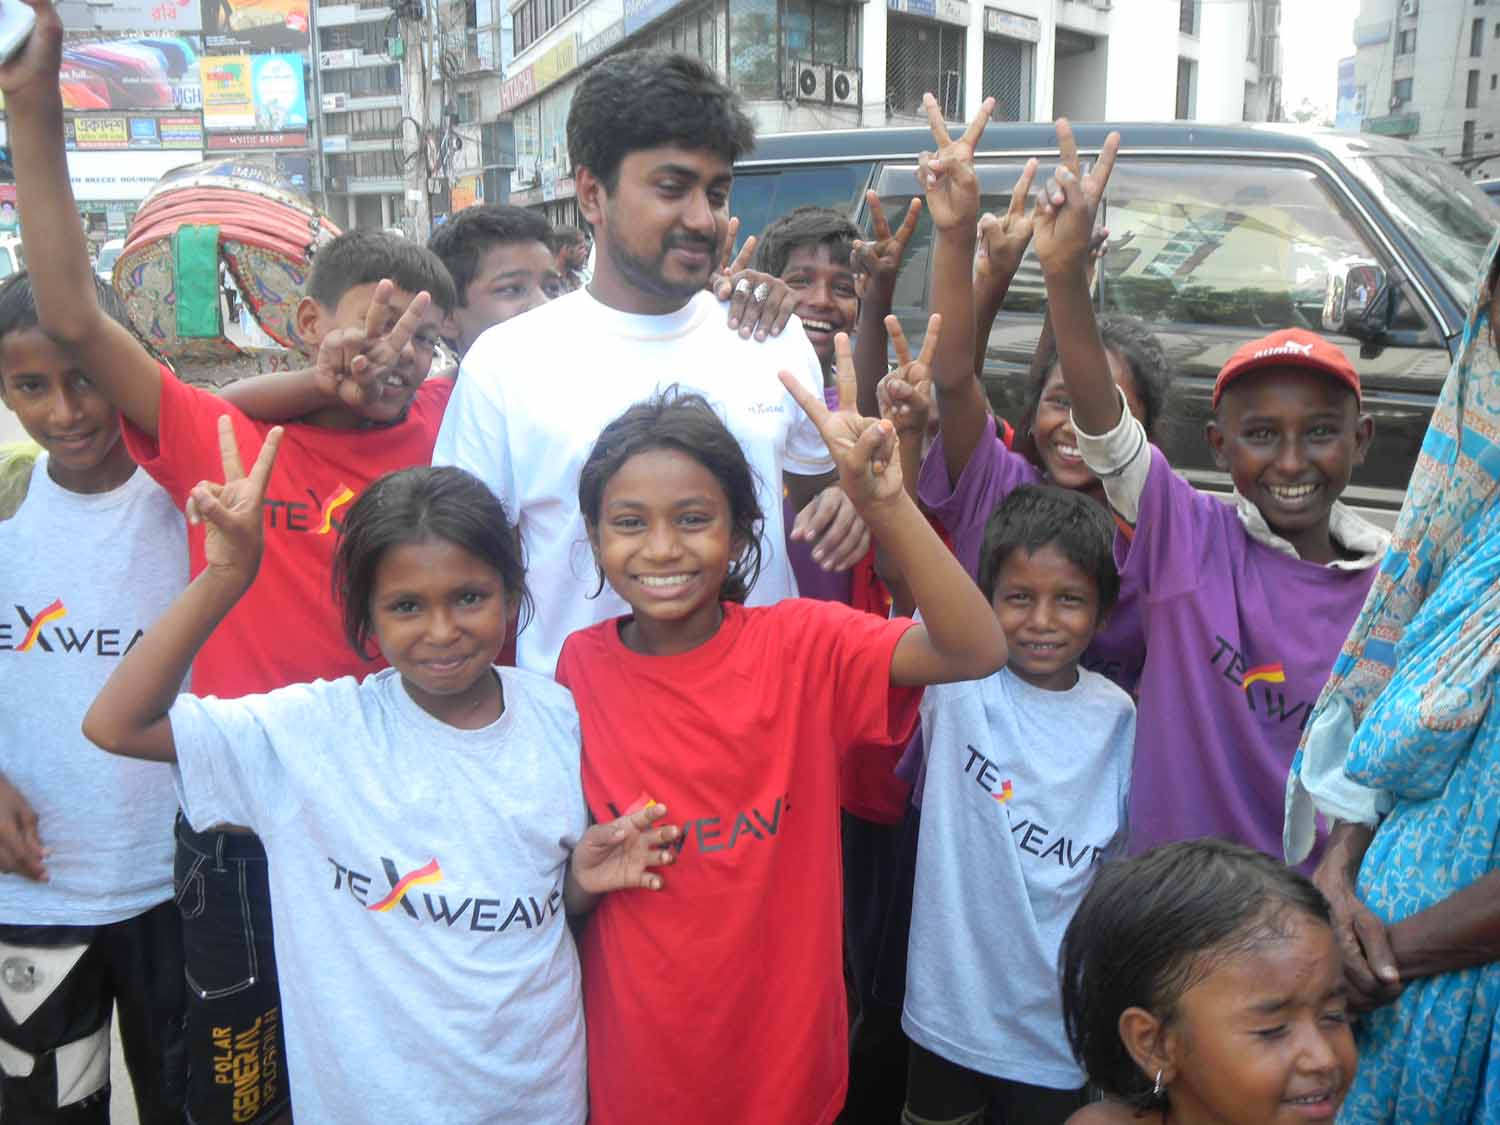 https://tadgroupbd.com/2023/11/02/support-them-to-avoid-child-labour/